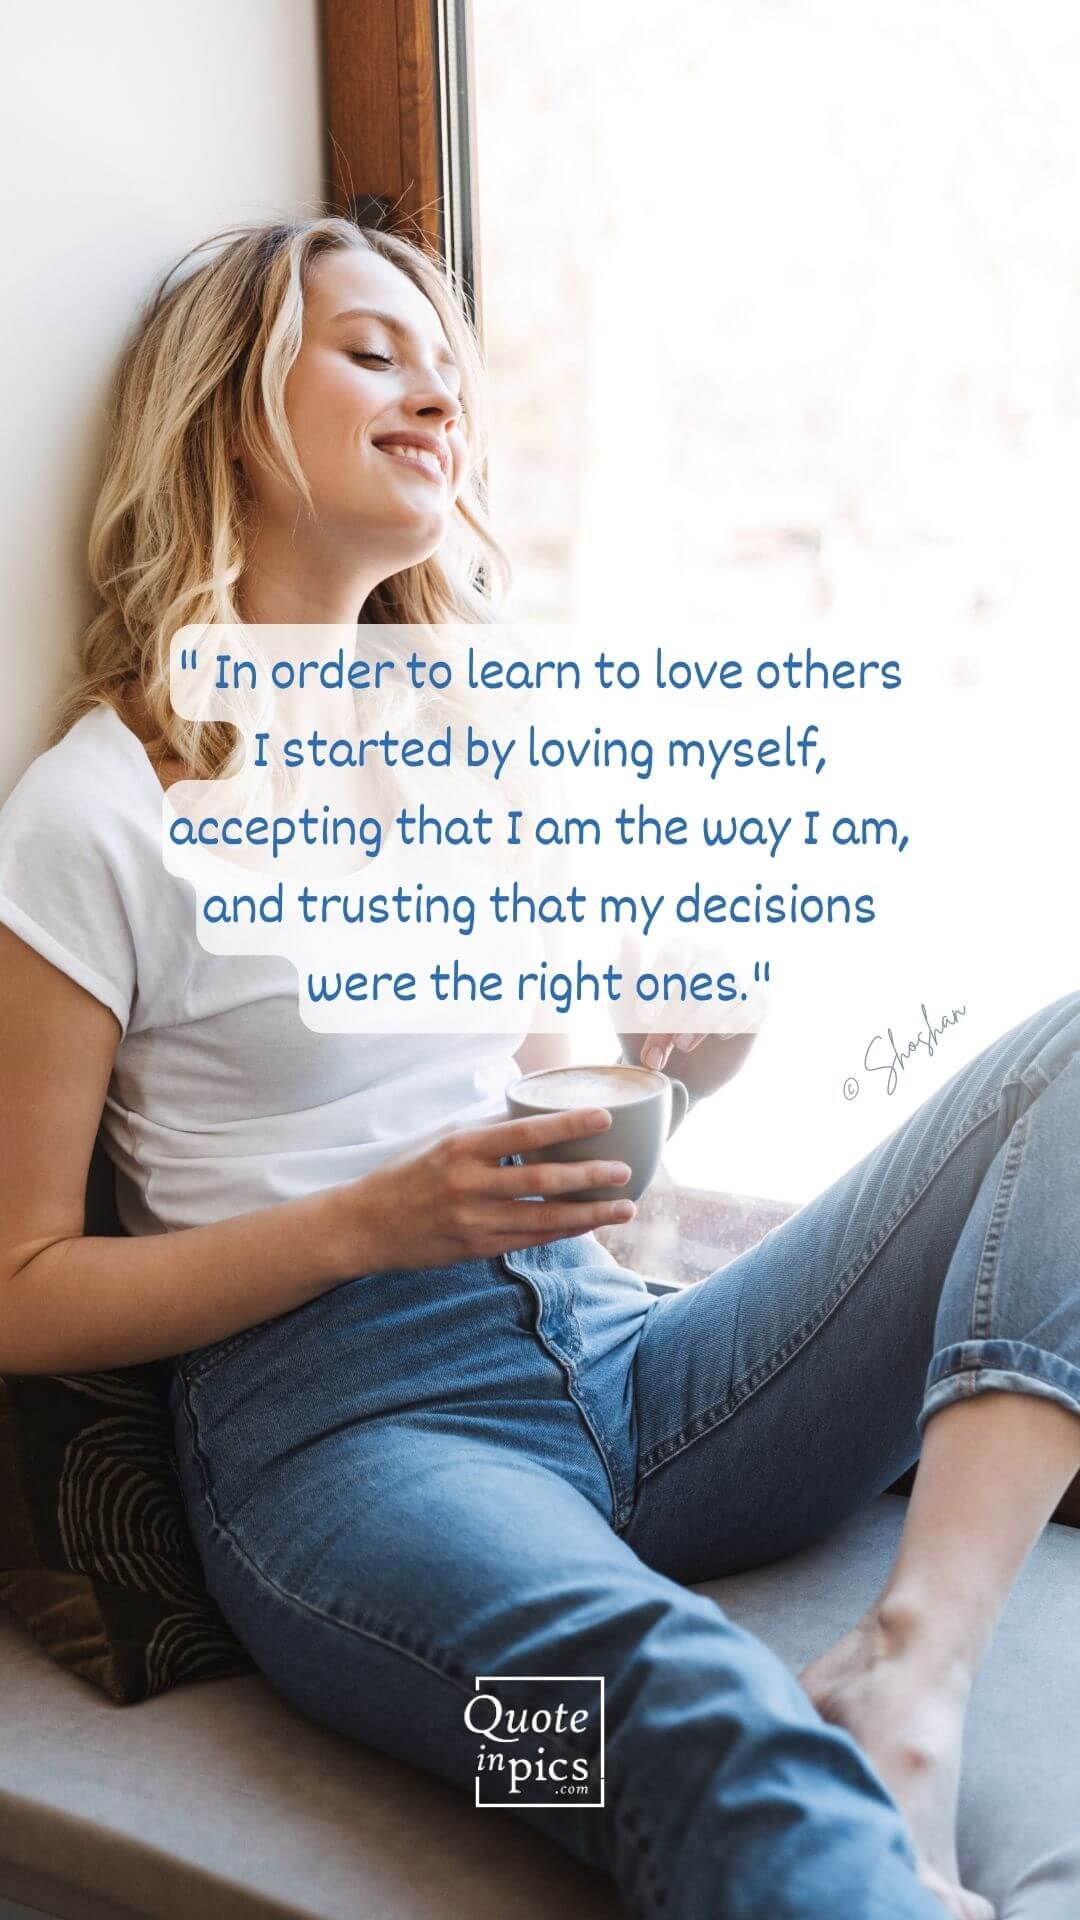 In order to learn to love others I started by loving myself